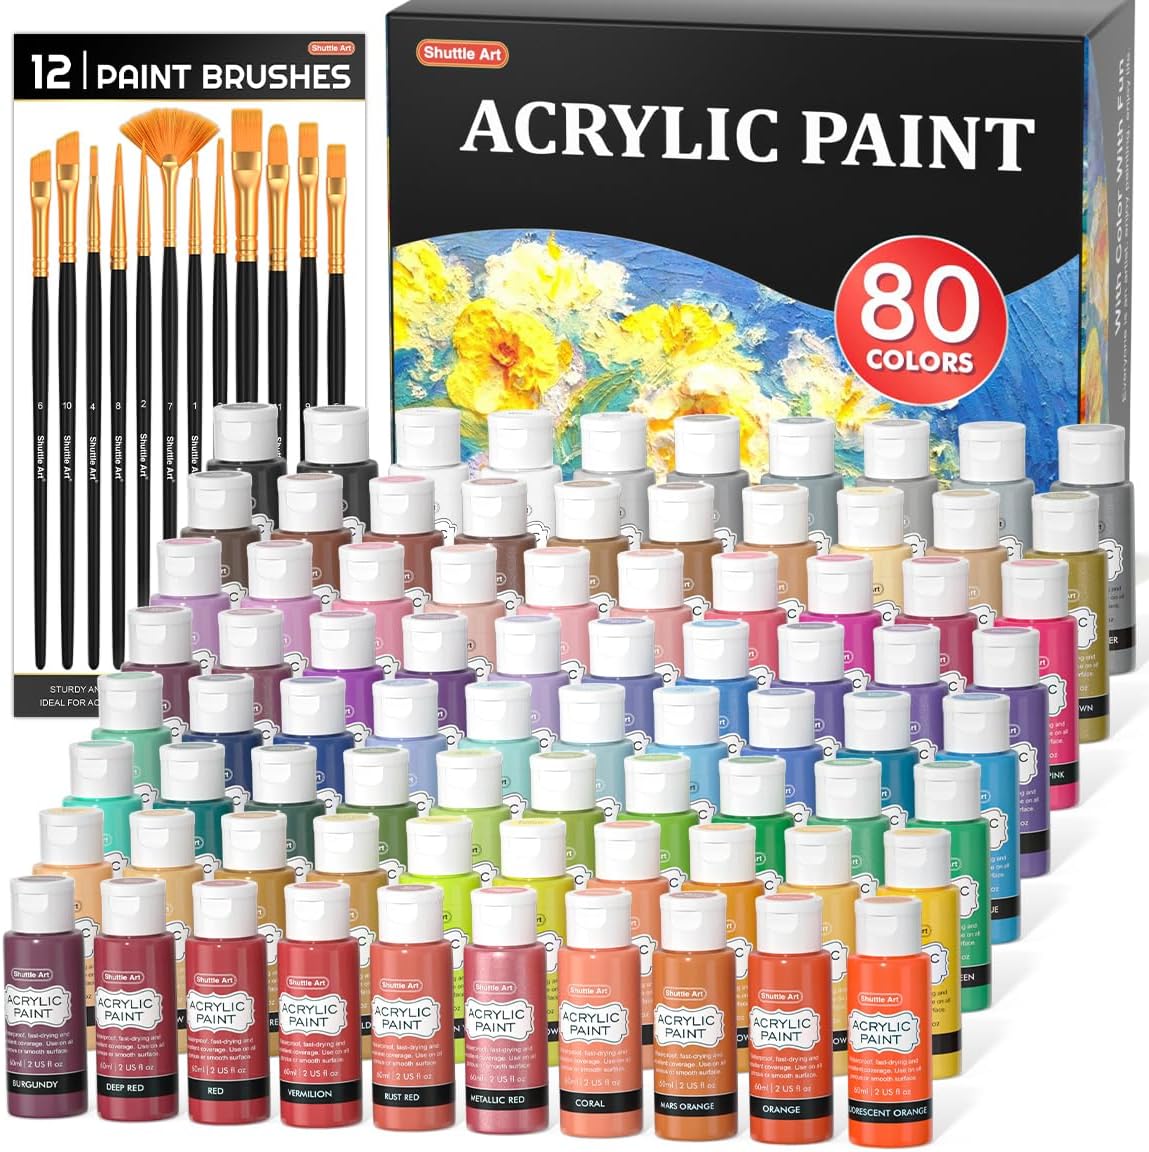 Shuttle Art Acrylic Paint Set, 15 x 12ml Tubes Artist Quality Non Toxic Rich Pigments Colors Perfect for Kids Adults Beginners Artists Painting on